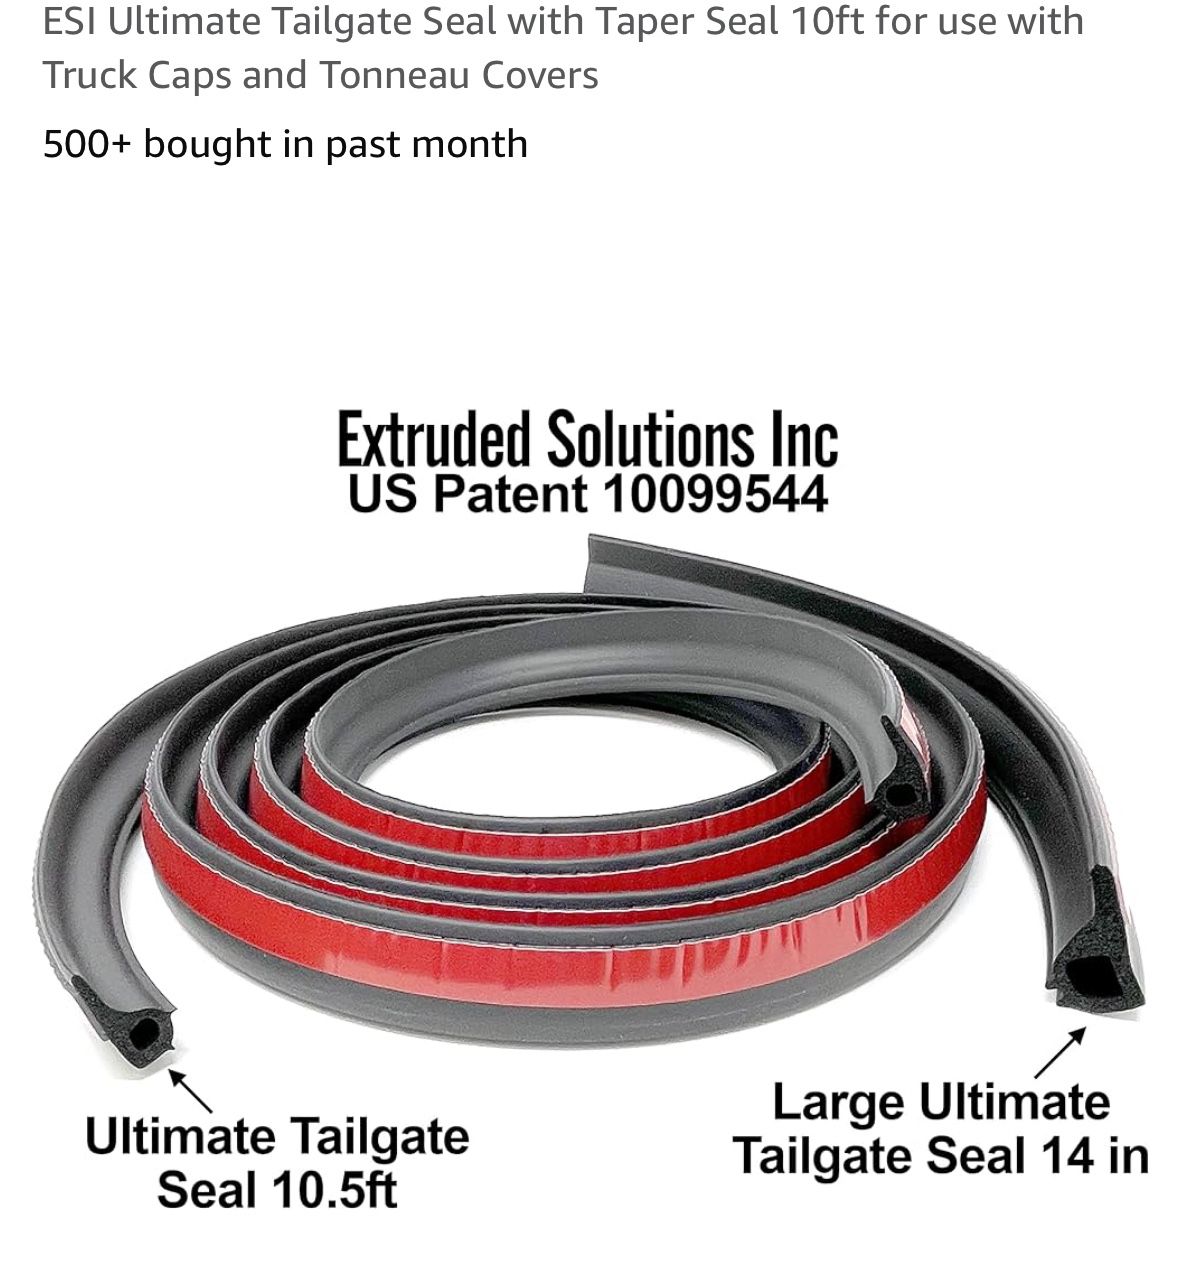 NEW ESI Ultimate Tailgate Seal with Taper Seal 10ft for use with Truck Caps and Tonneau Covers